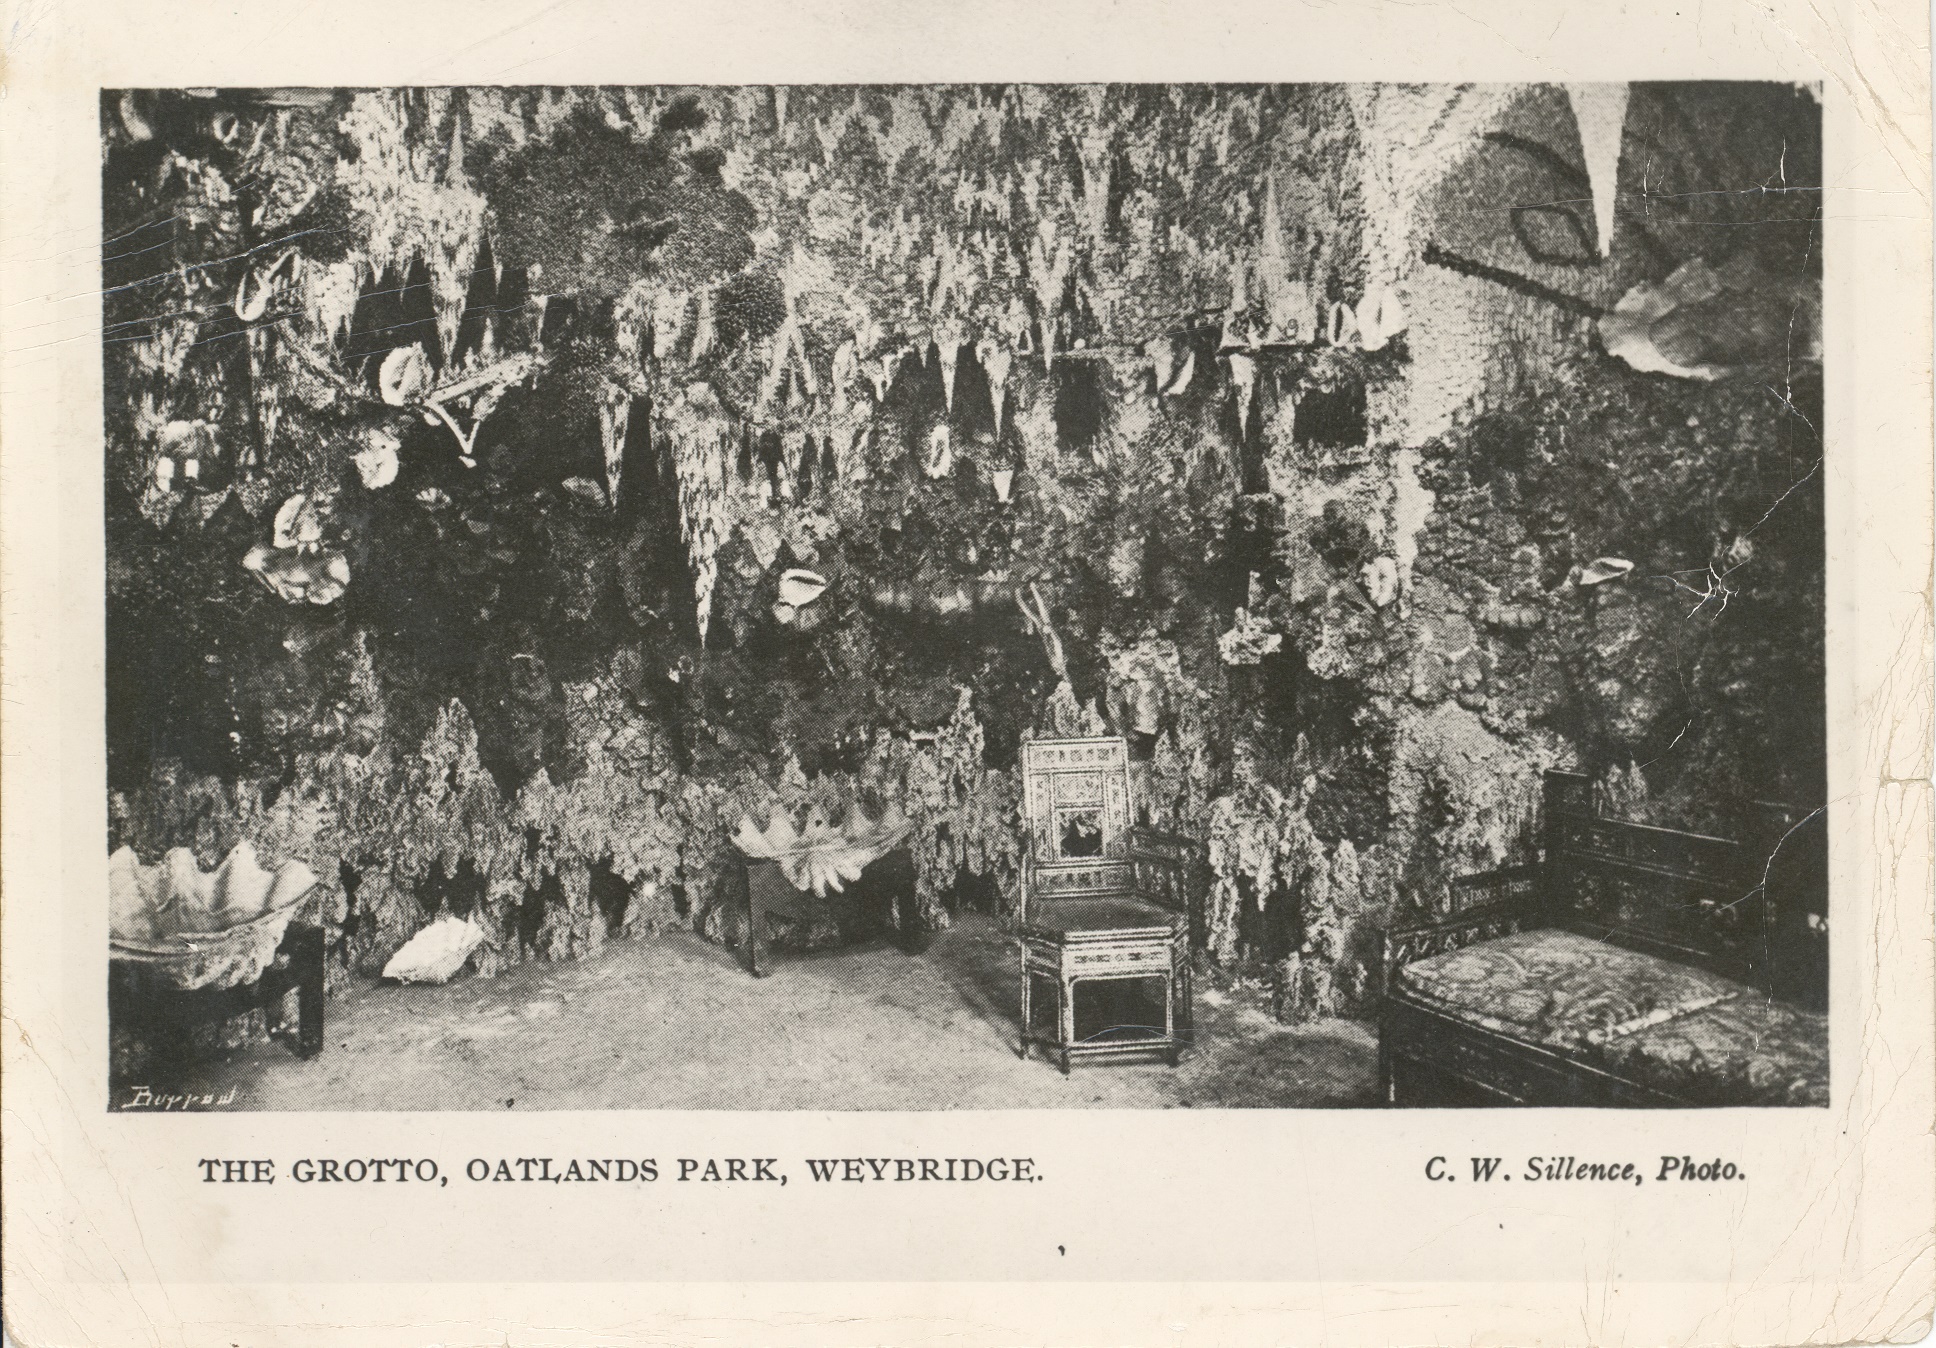 The interior of the Oatlands Grotto, showing the Upper Chamber with chairs, and shells mounted on legs to form tables.